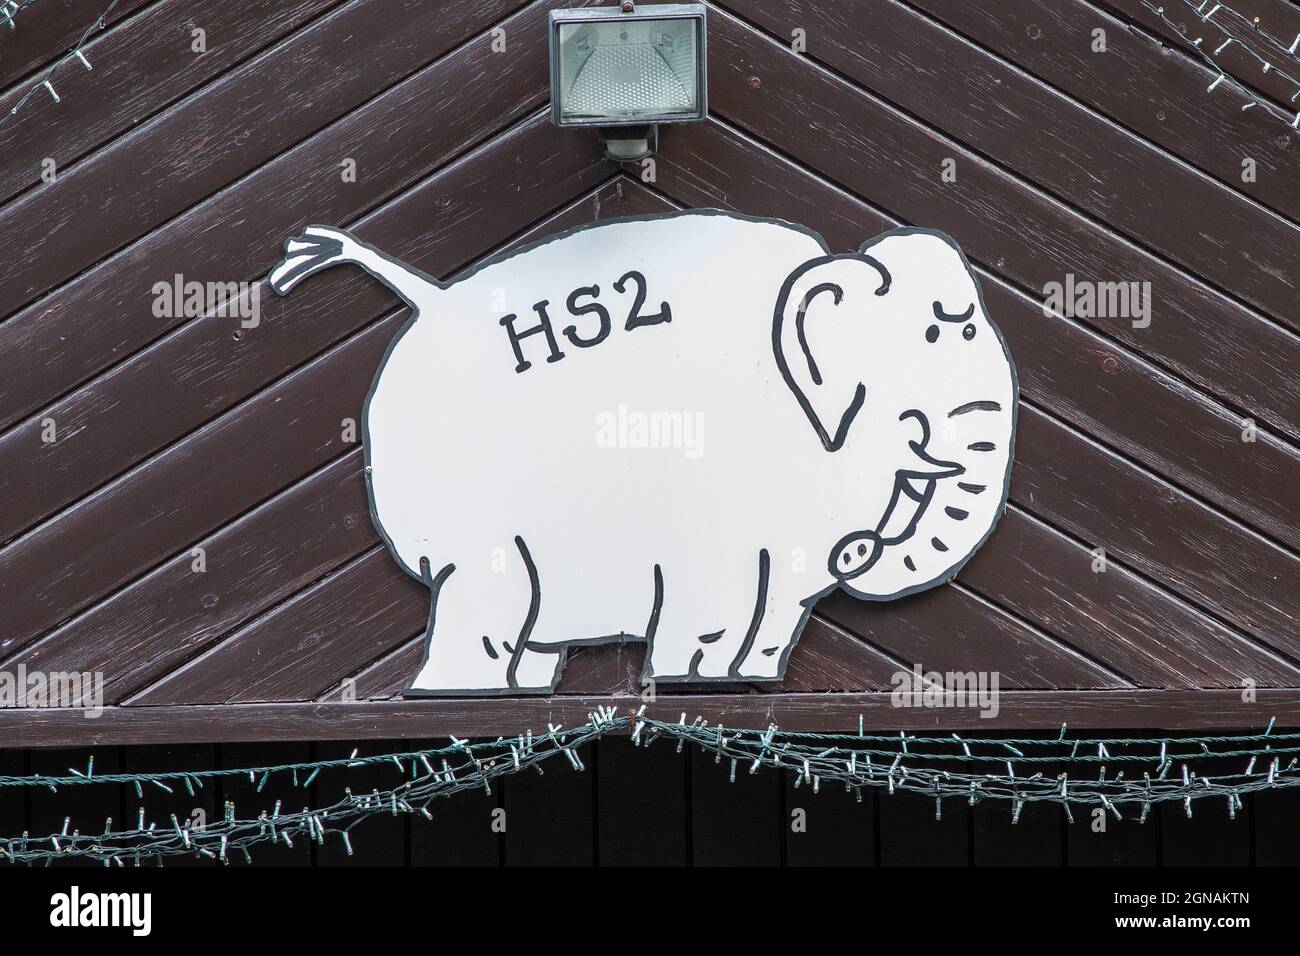 A sign above a garage in Red Lane Burton Green implying that the nearby HS2 railway construction is a white elephant. Stock Photo